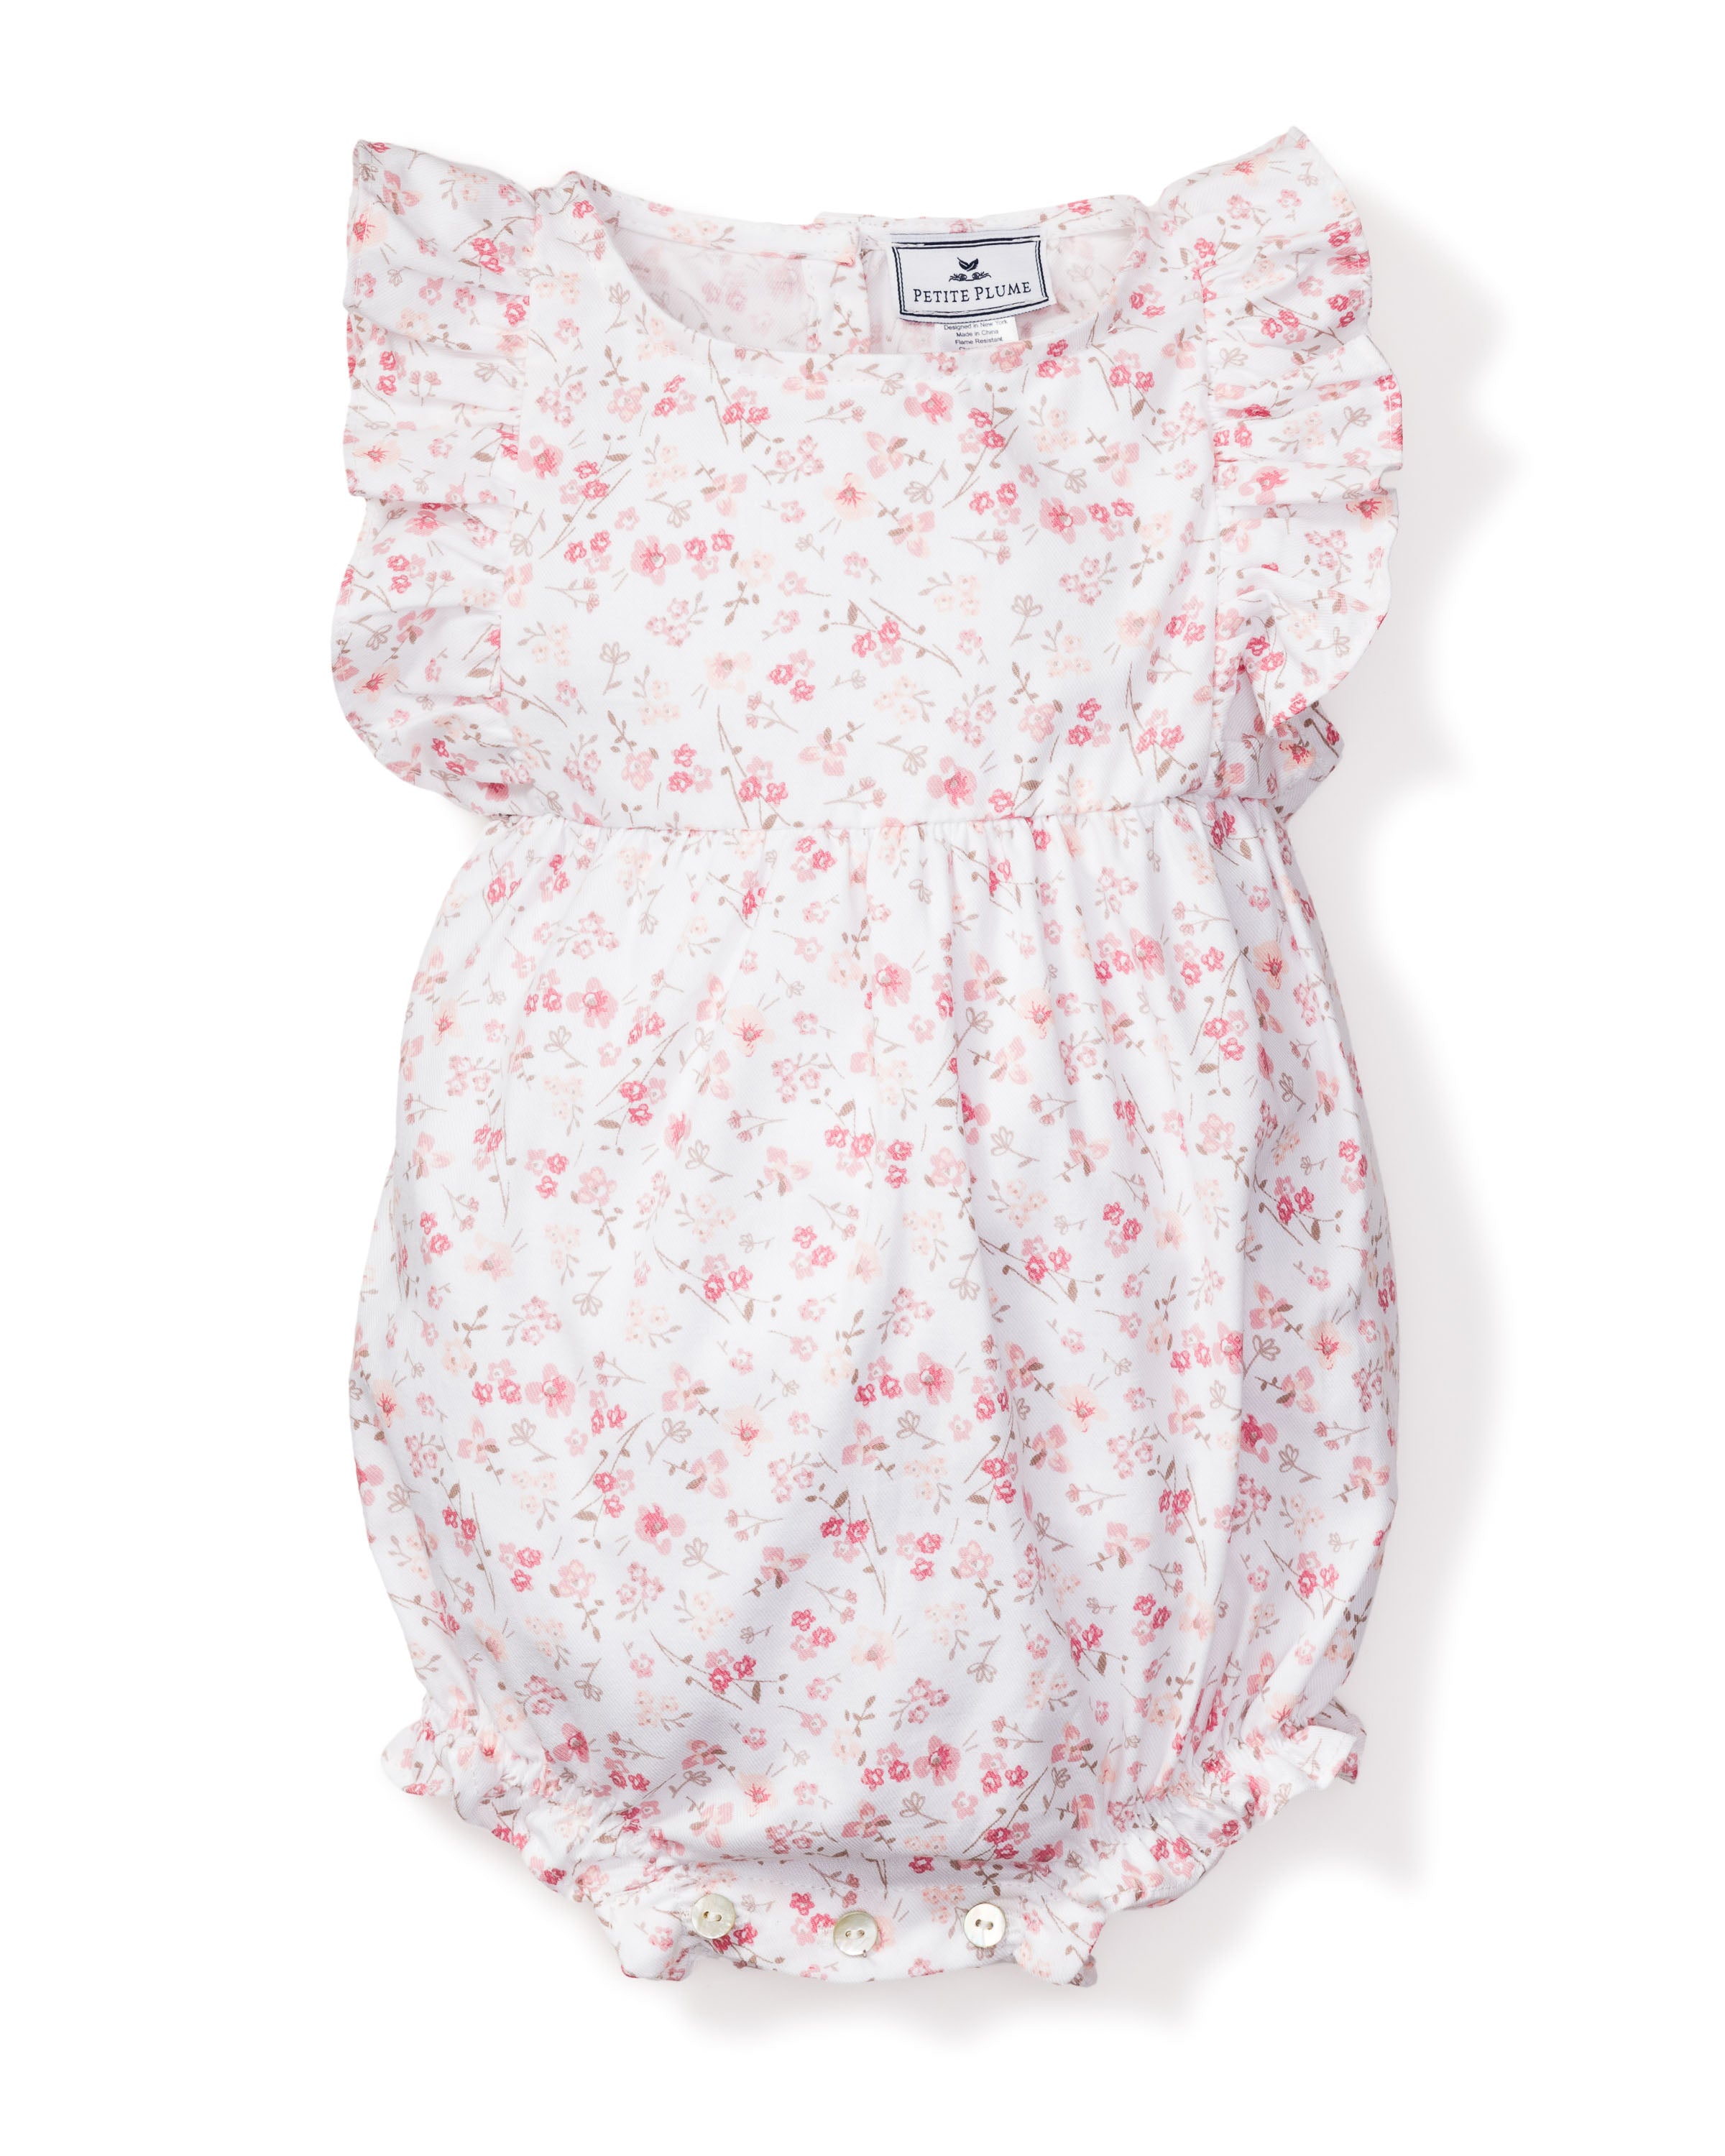 Baby's Twill Ruffled Romper in Dorset Floral